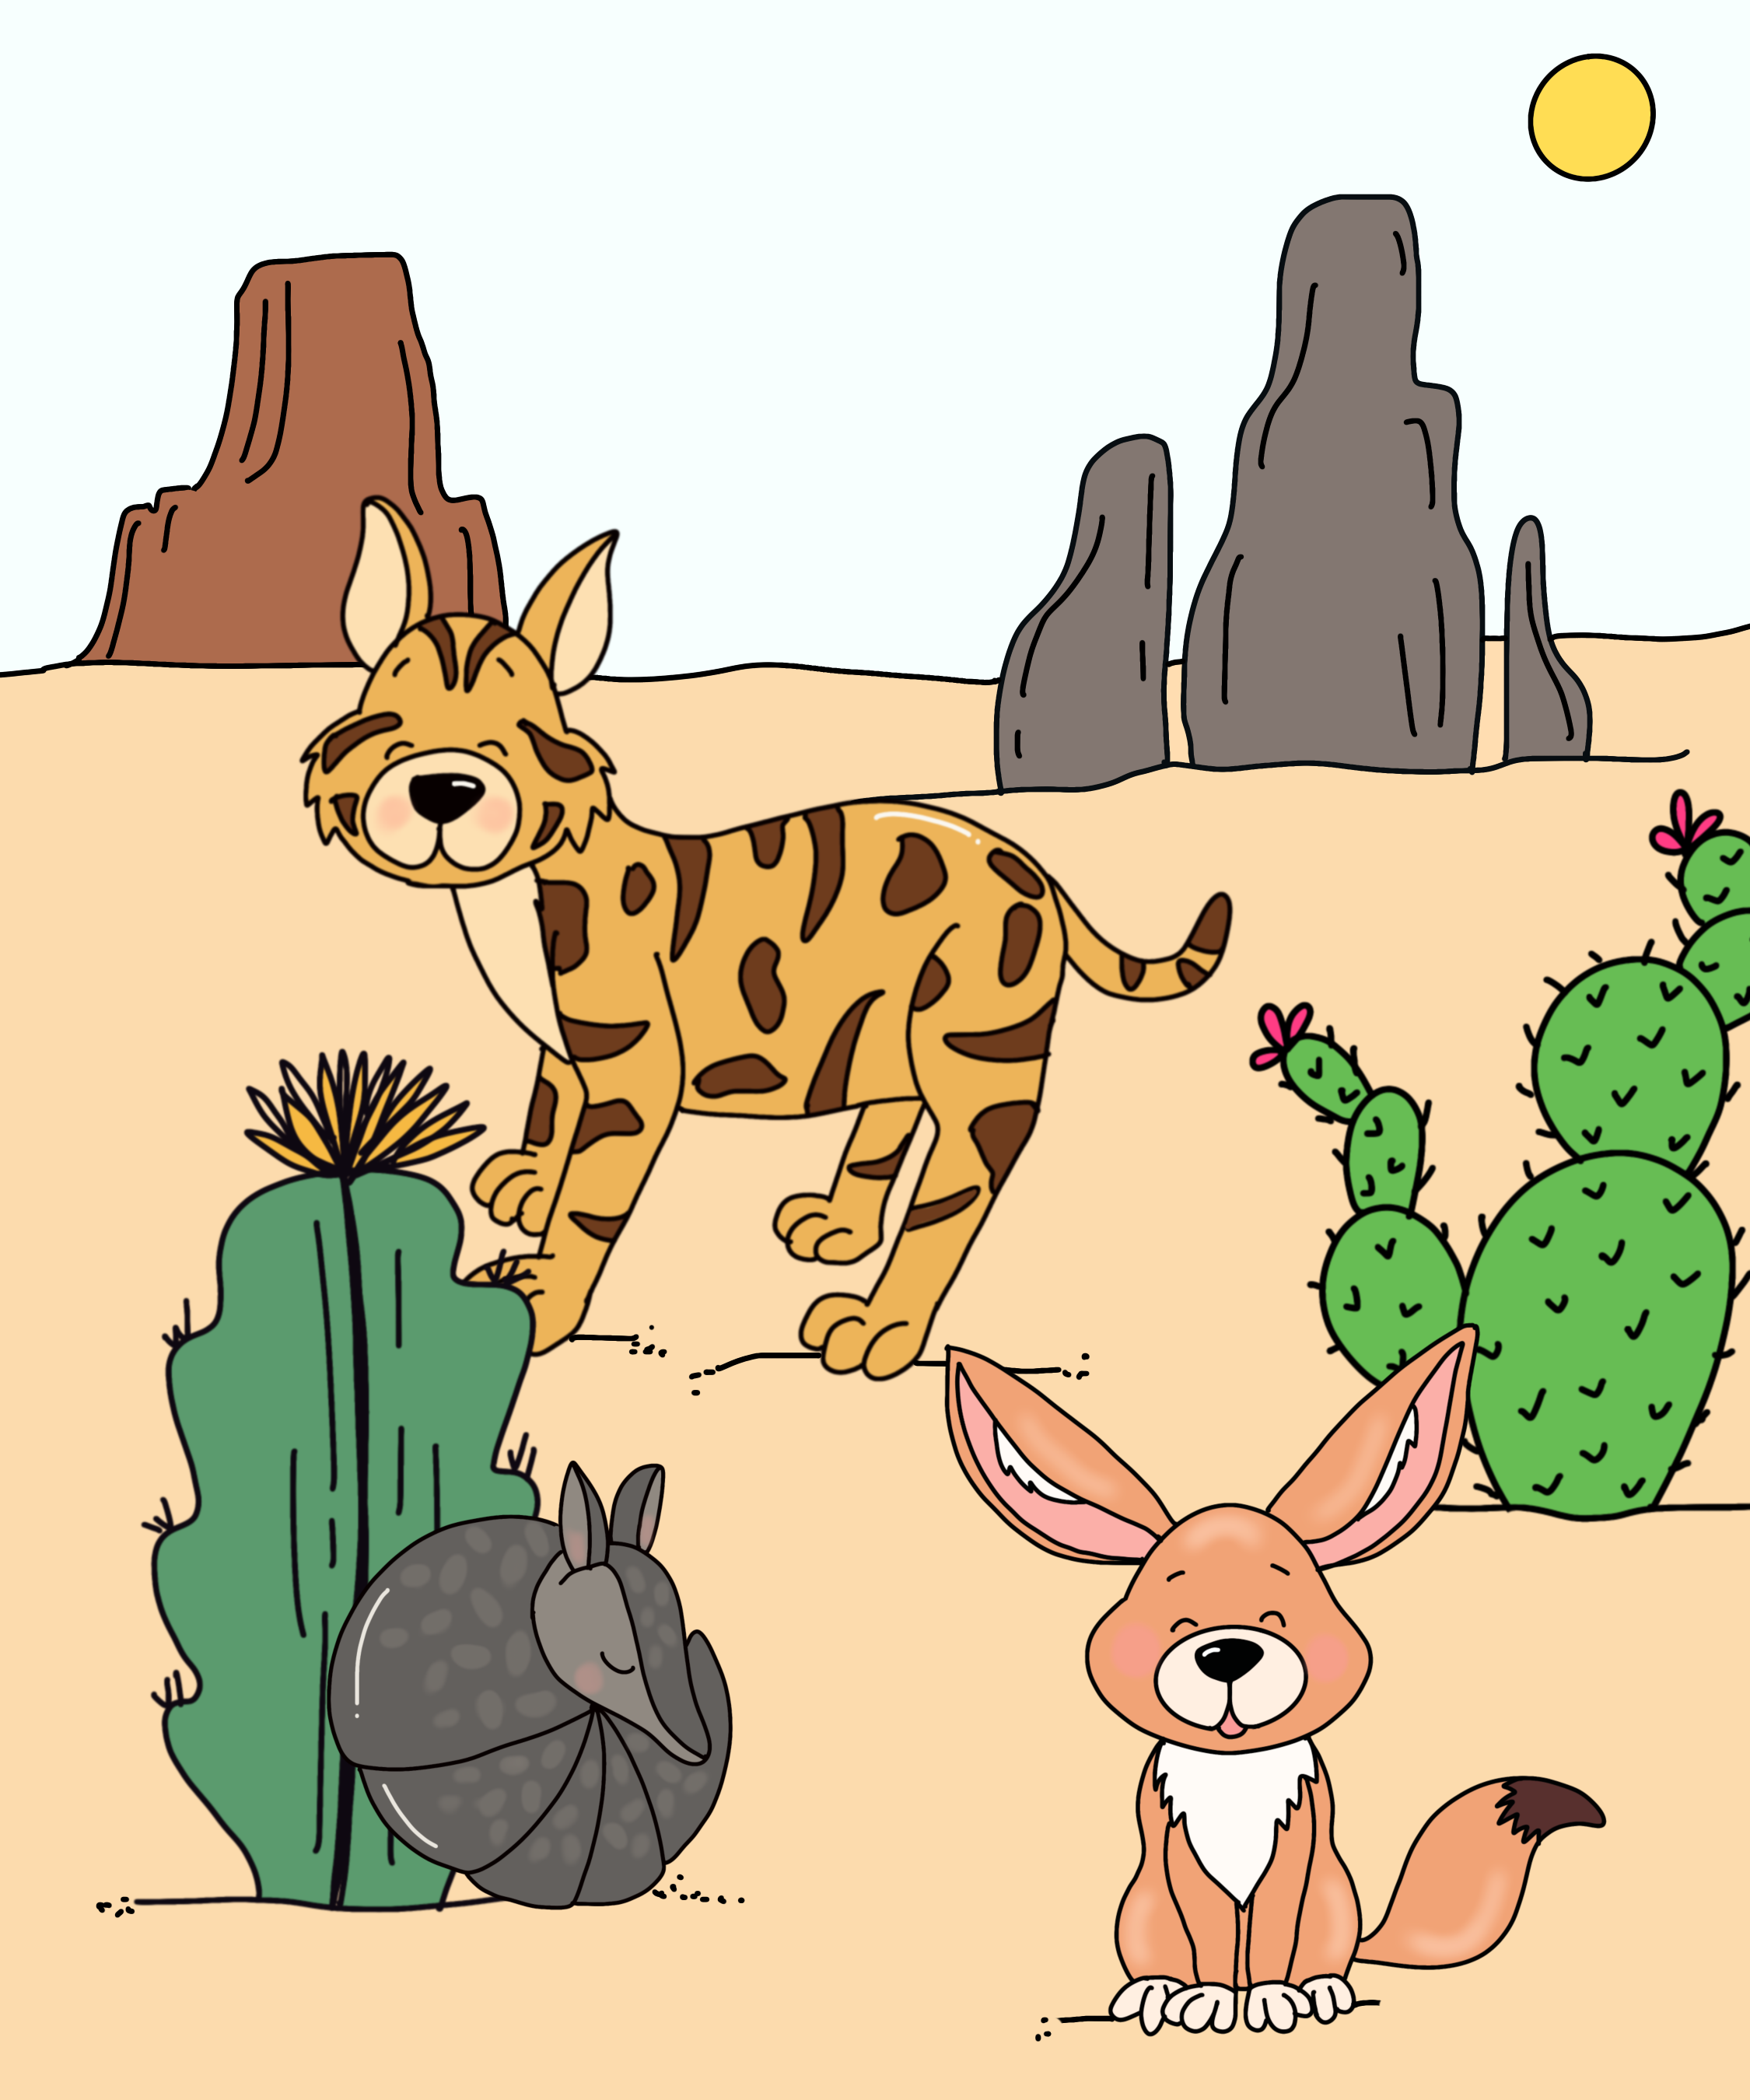 Image is a hand-drawn desert scene including an armadillo, a bobcat, and a fennec fox among cacti and rock formations.